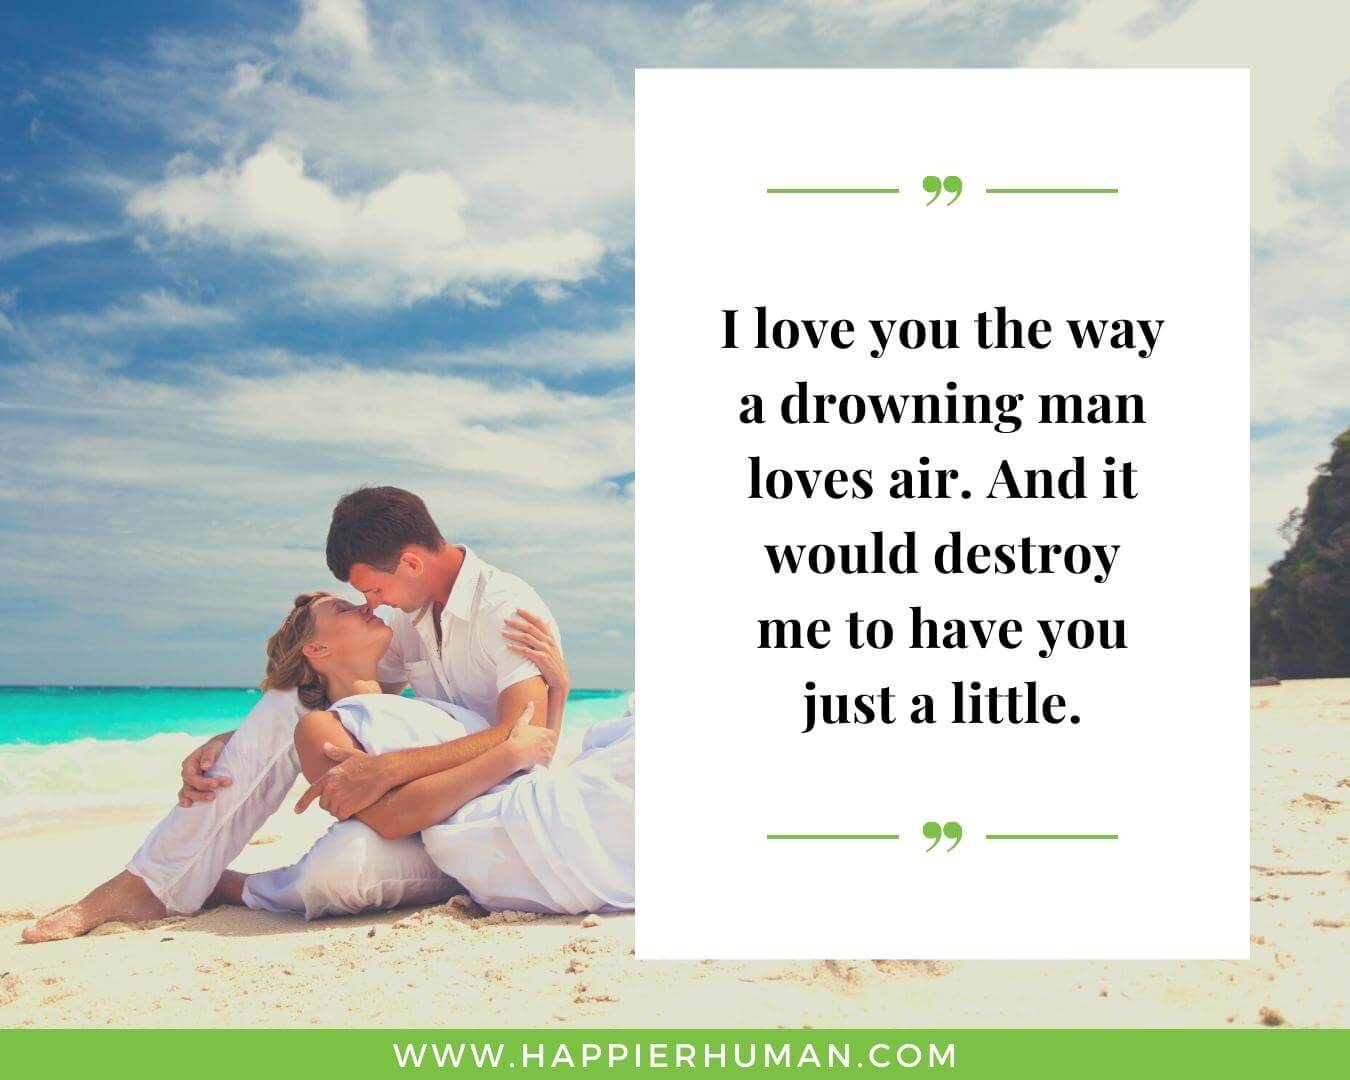 Unconditional Love Quotes for Her - “I love you the way a drowning man loves air. And it would destroy me to have you just a little.”
